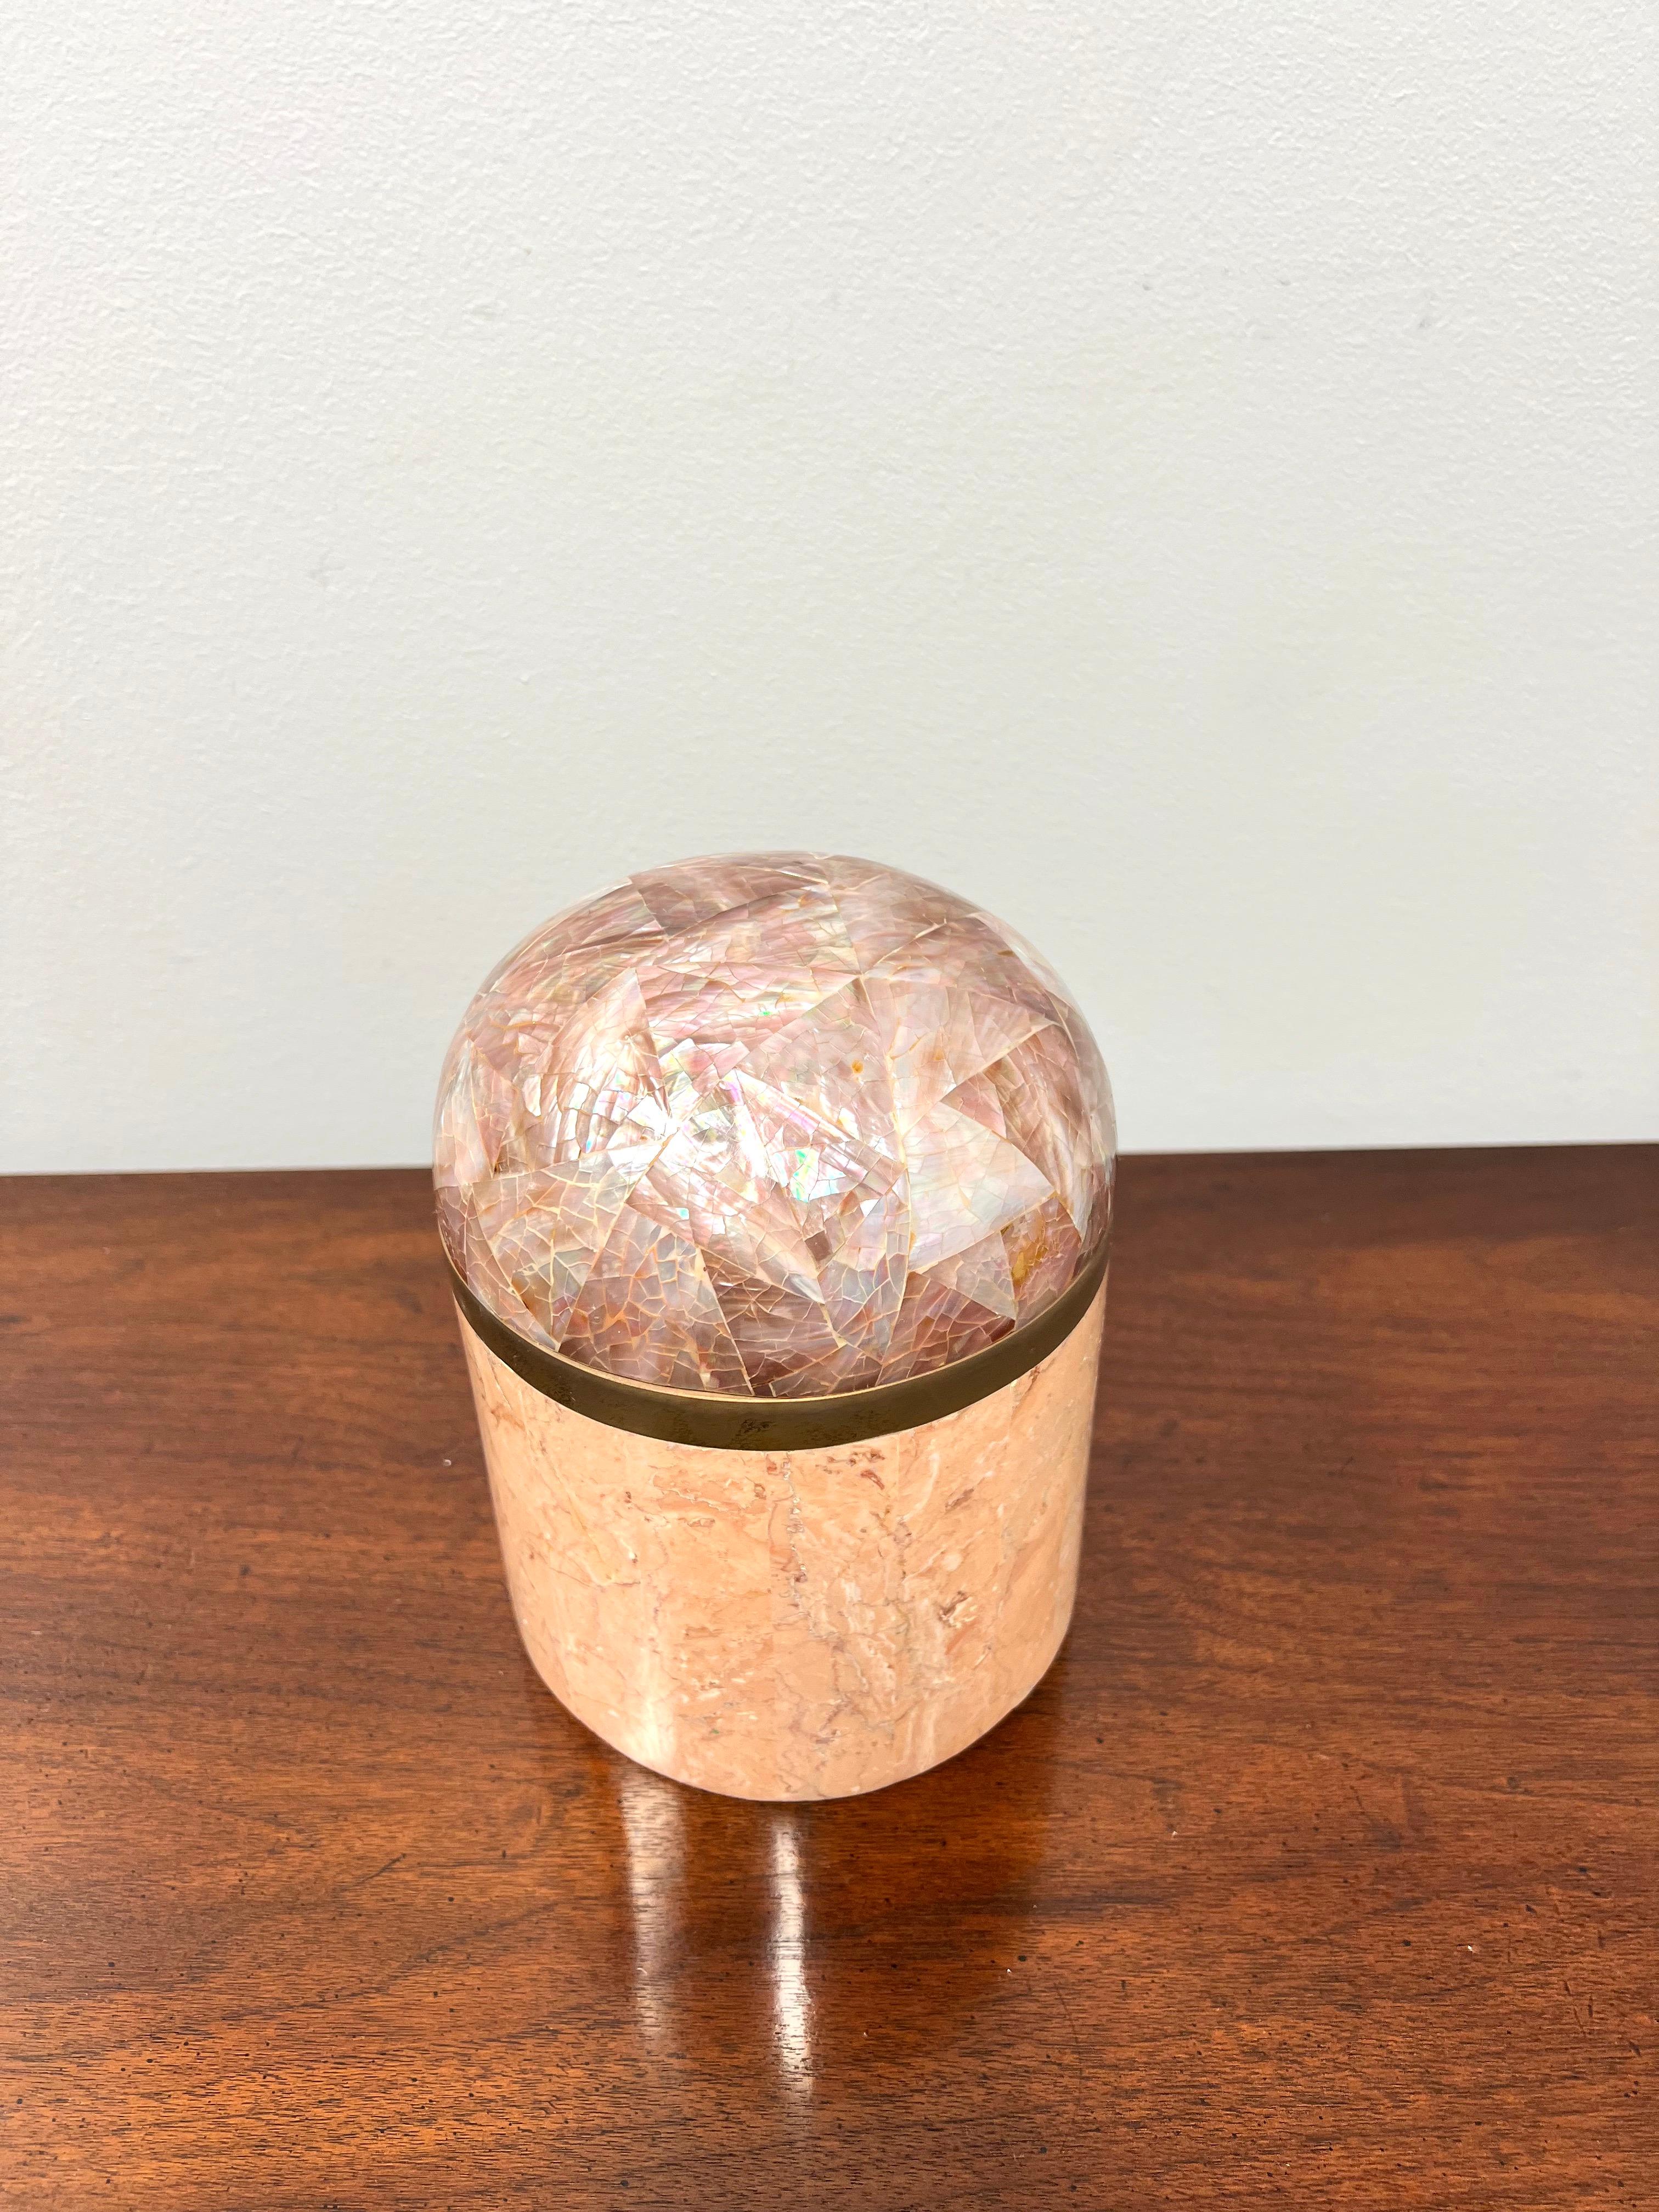 A trinket box with dome lid in tessellated stone by Dara, a division of Kinder-Harris. Box is shades of pink colored tessellated stone tiles in a round shade, removable lid is dome shaped & in shades of amethyst colored patterned tessellated stone